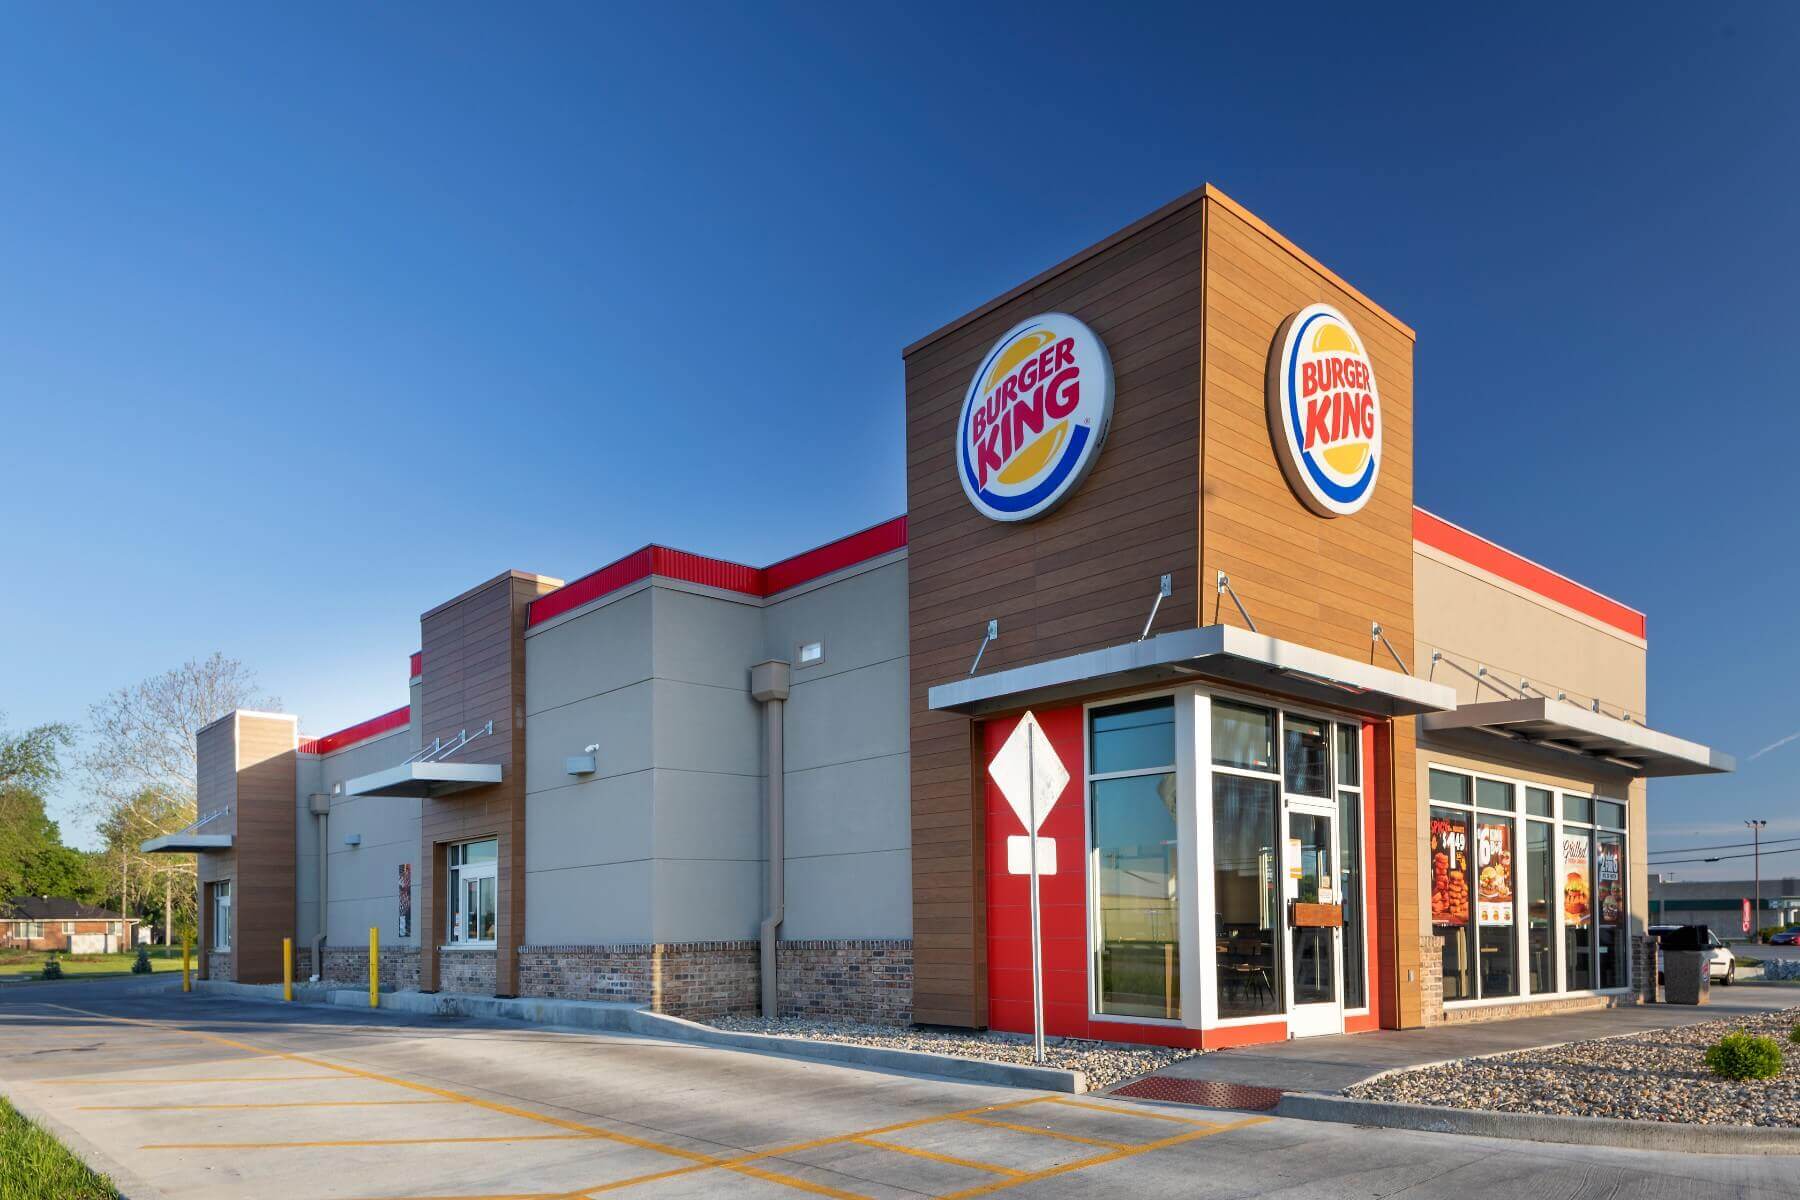 Burger King menu prices featuring 89 items ranging from $0.69 to $9.19